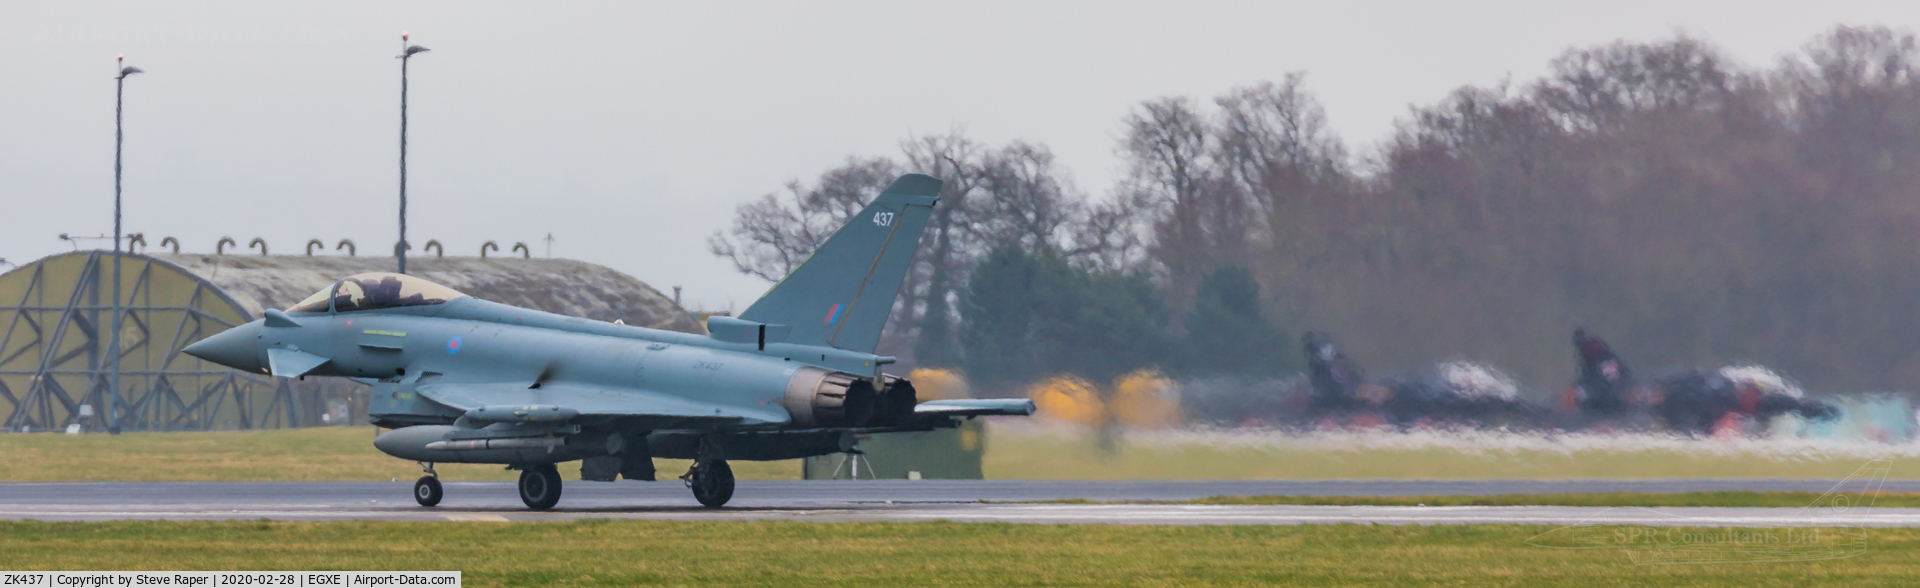 ZK437, 2019 Eurofighter EF-2000 Typhoon FGR.4 C/N BS153, A very rainy RAF Leeming. Returning after a NATO exercise sortie.